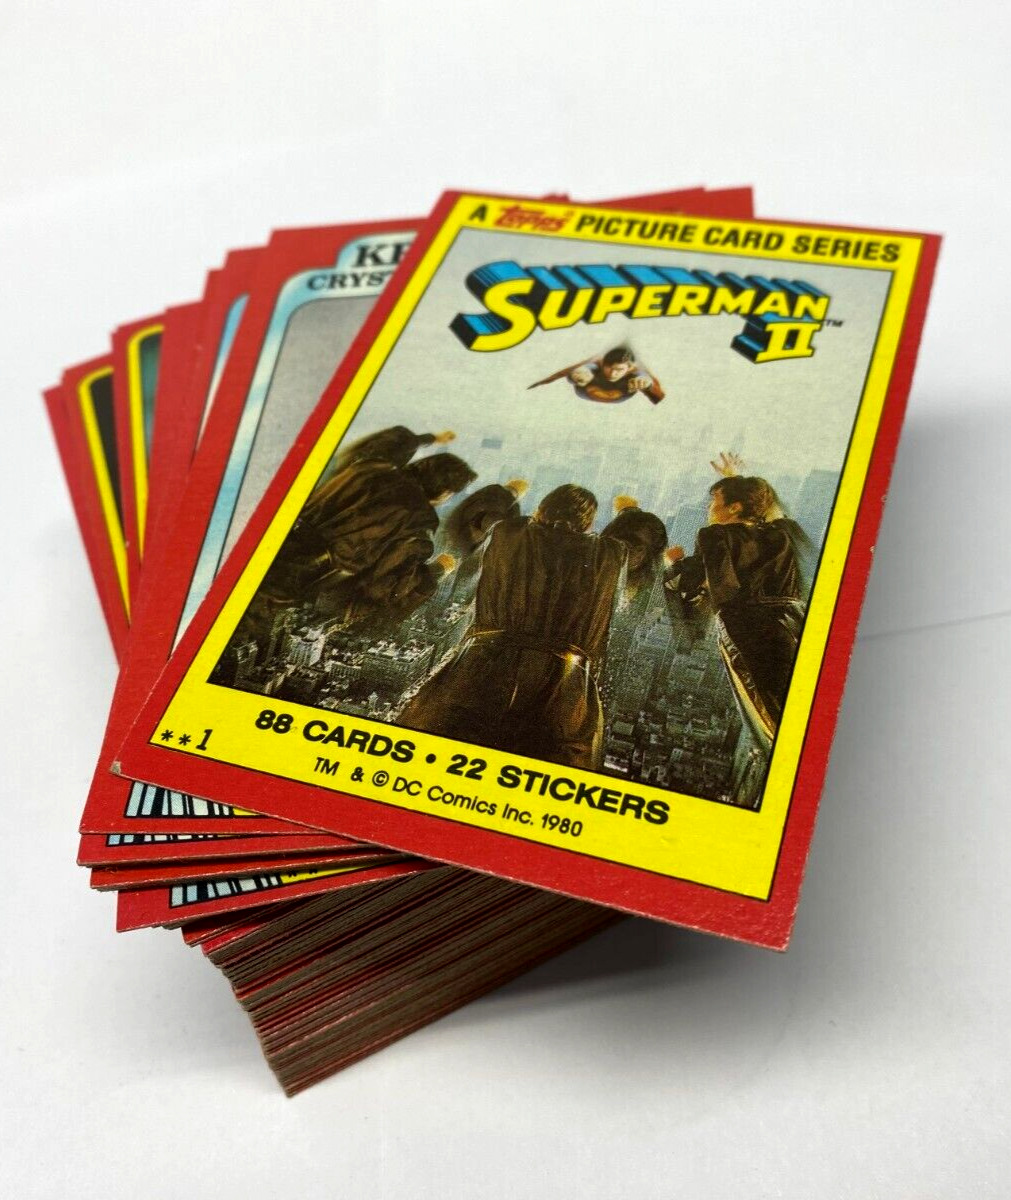 VTG Topps 1980 Superman 2 Movie Trading 88 Cards NO Stickers Reeves Zod Loise